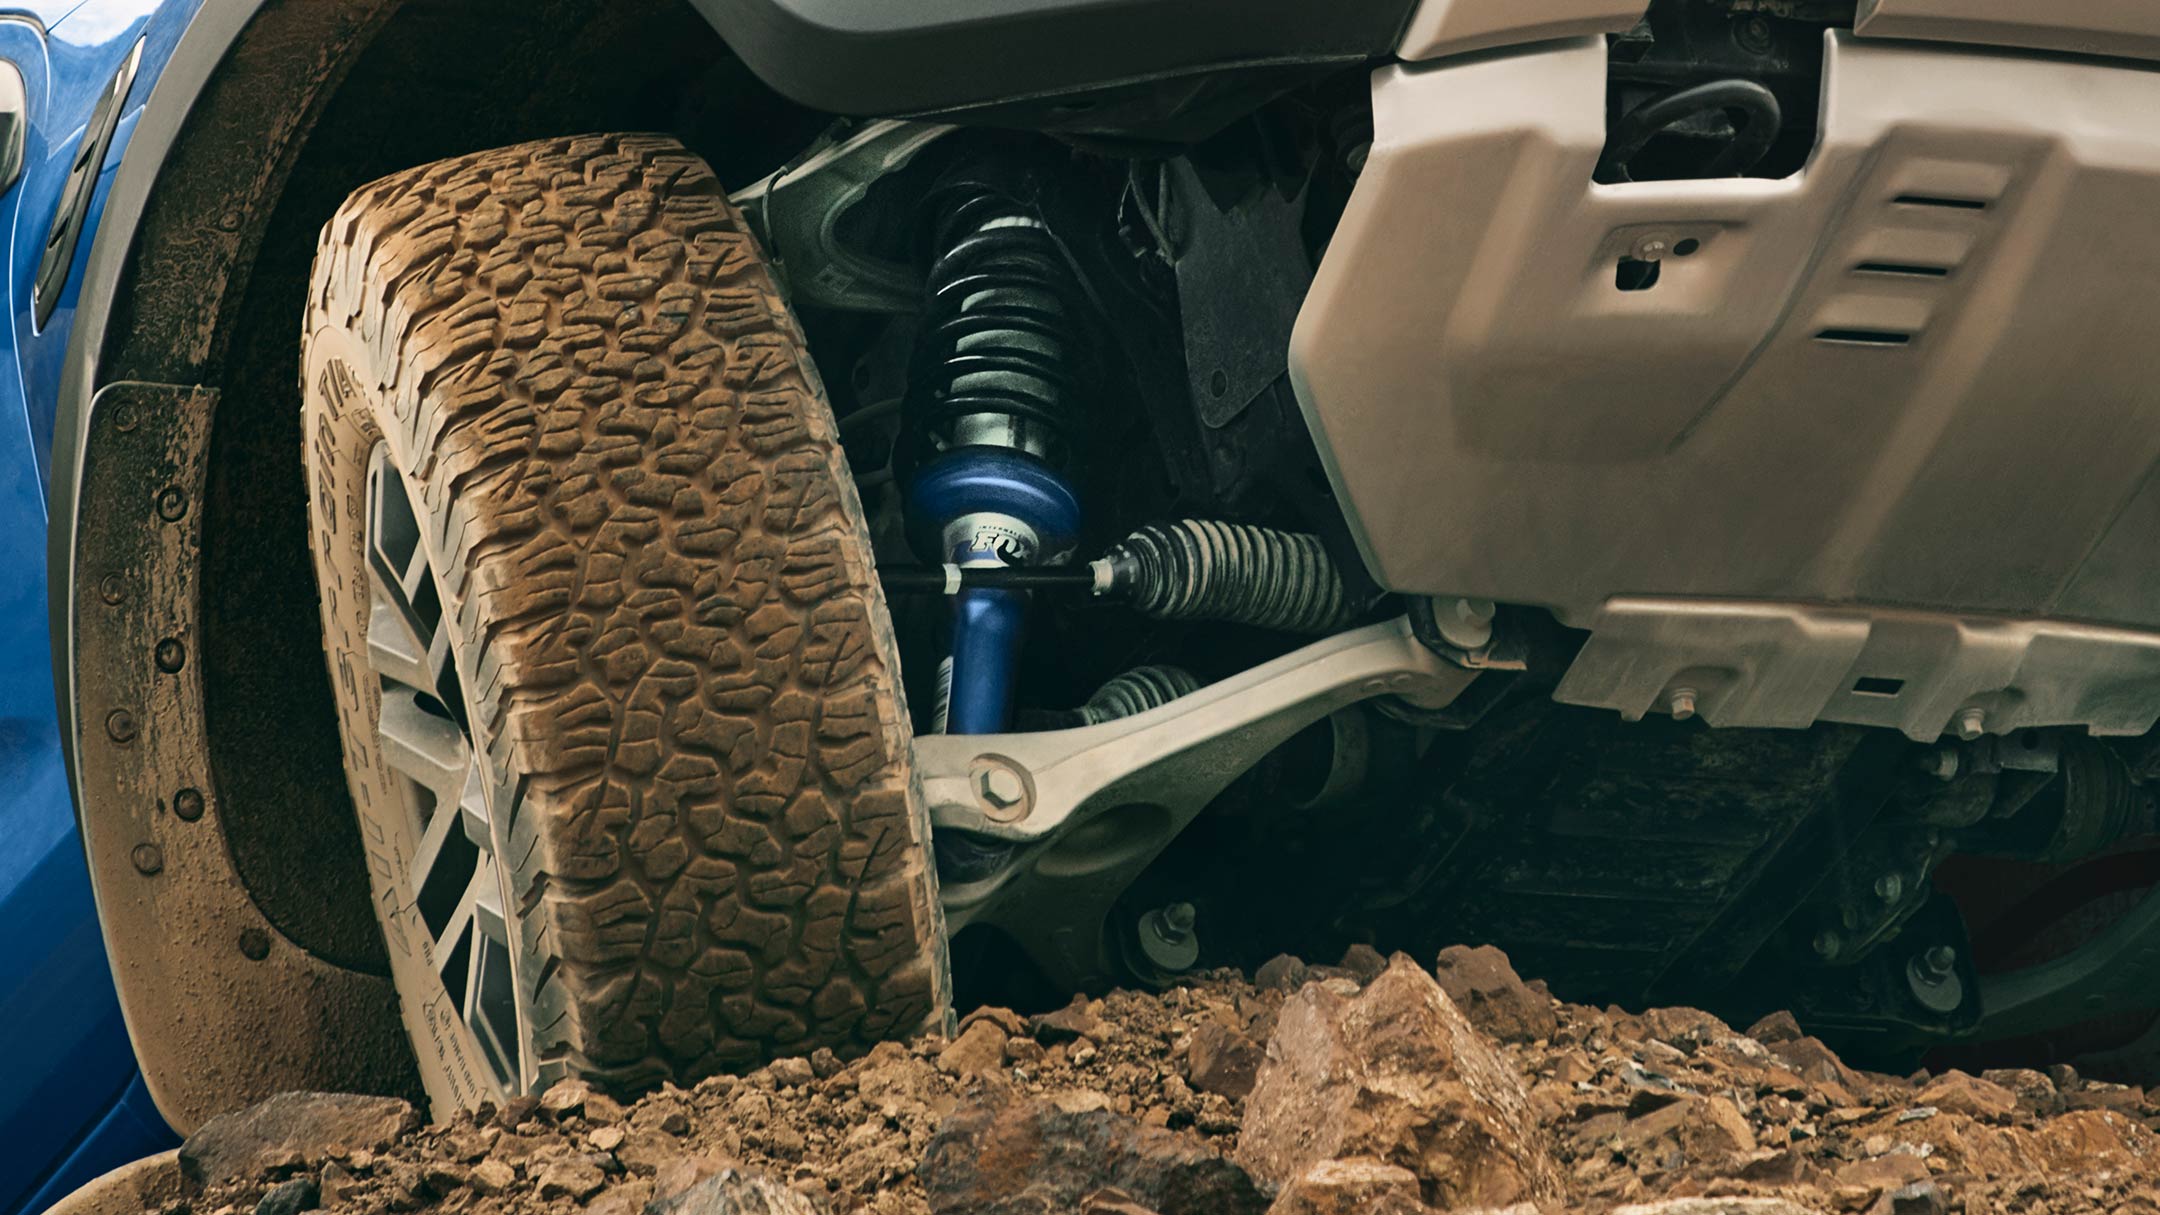 Ford Ranger Raptor showing close up of FOX suspension